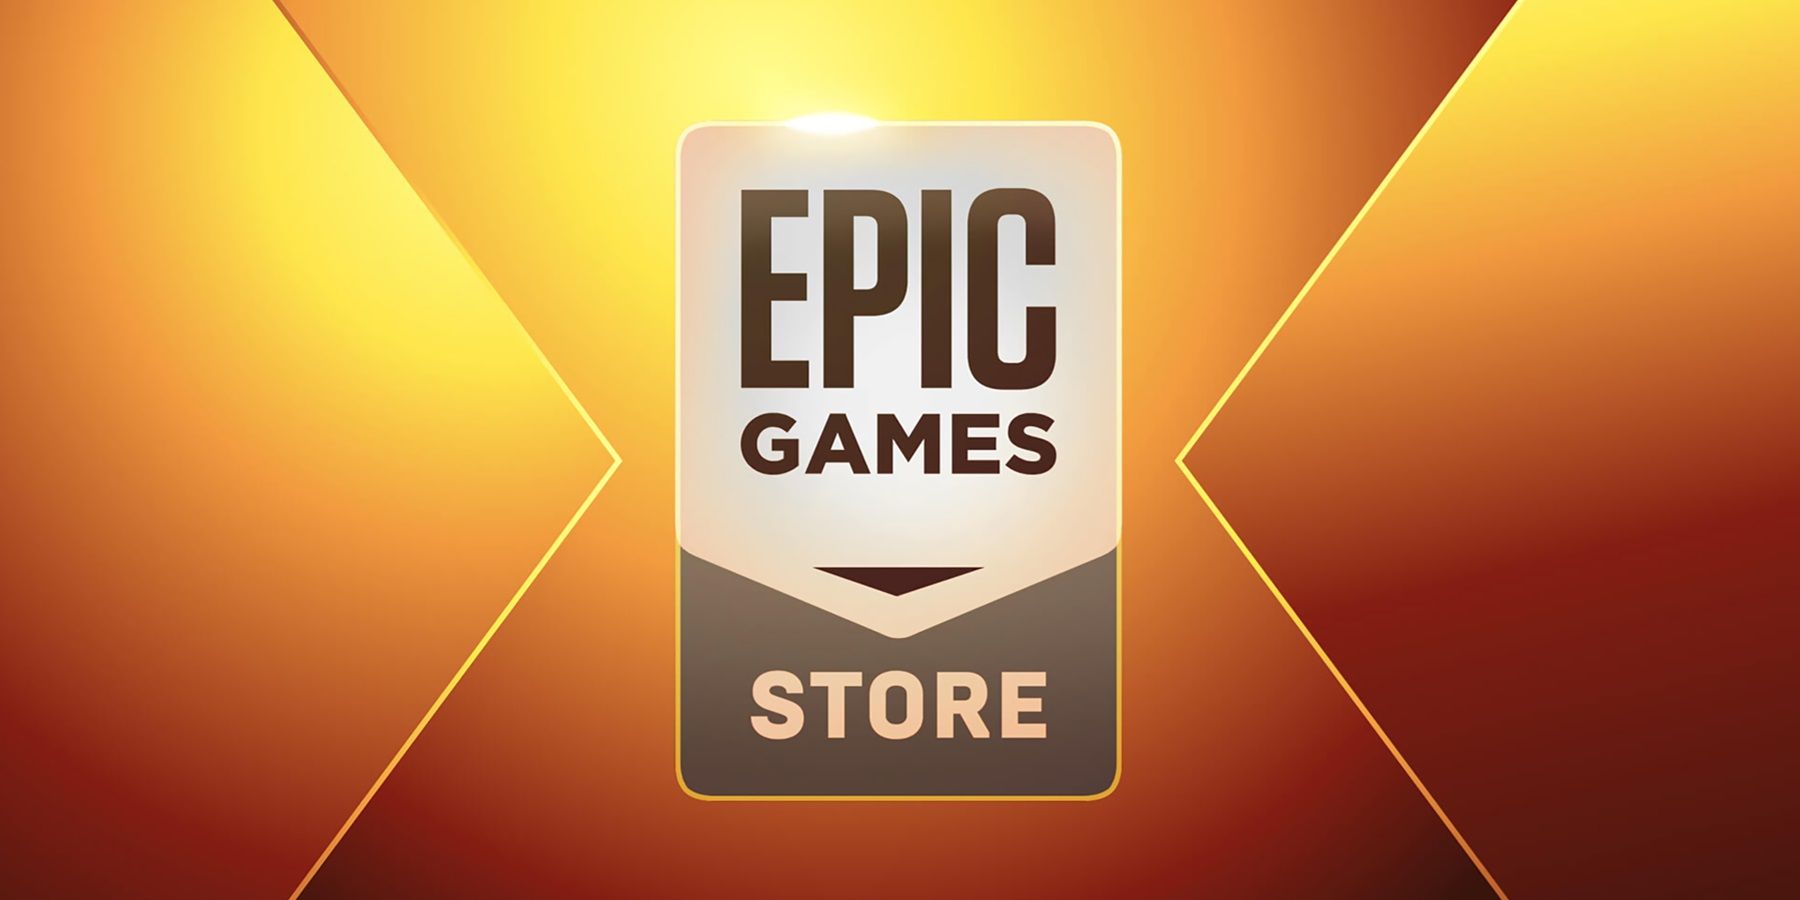 epic games store logo with gold background